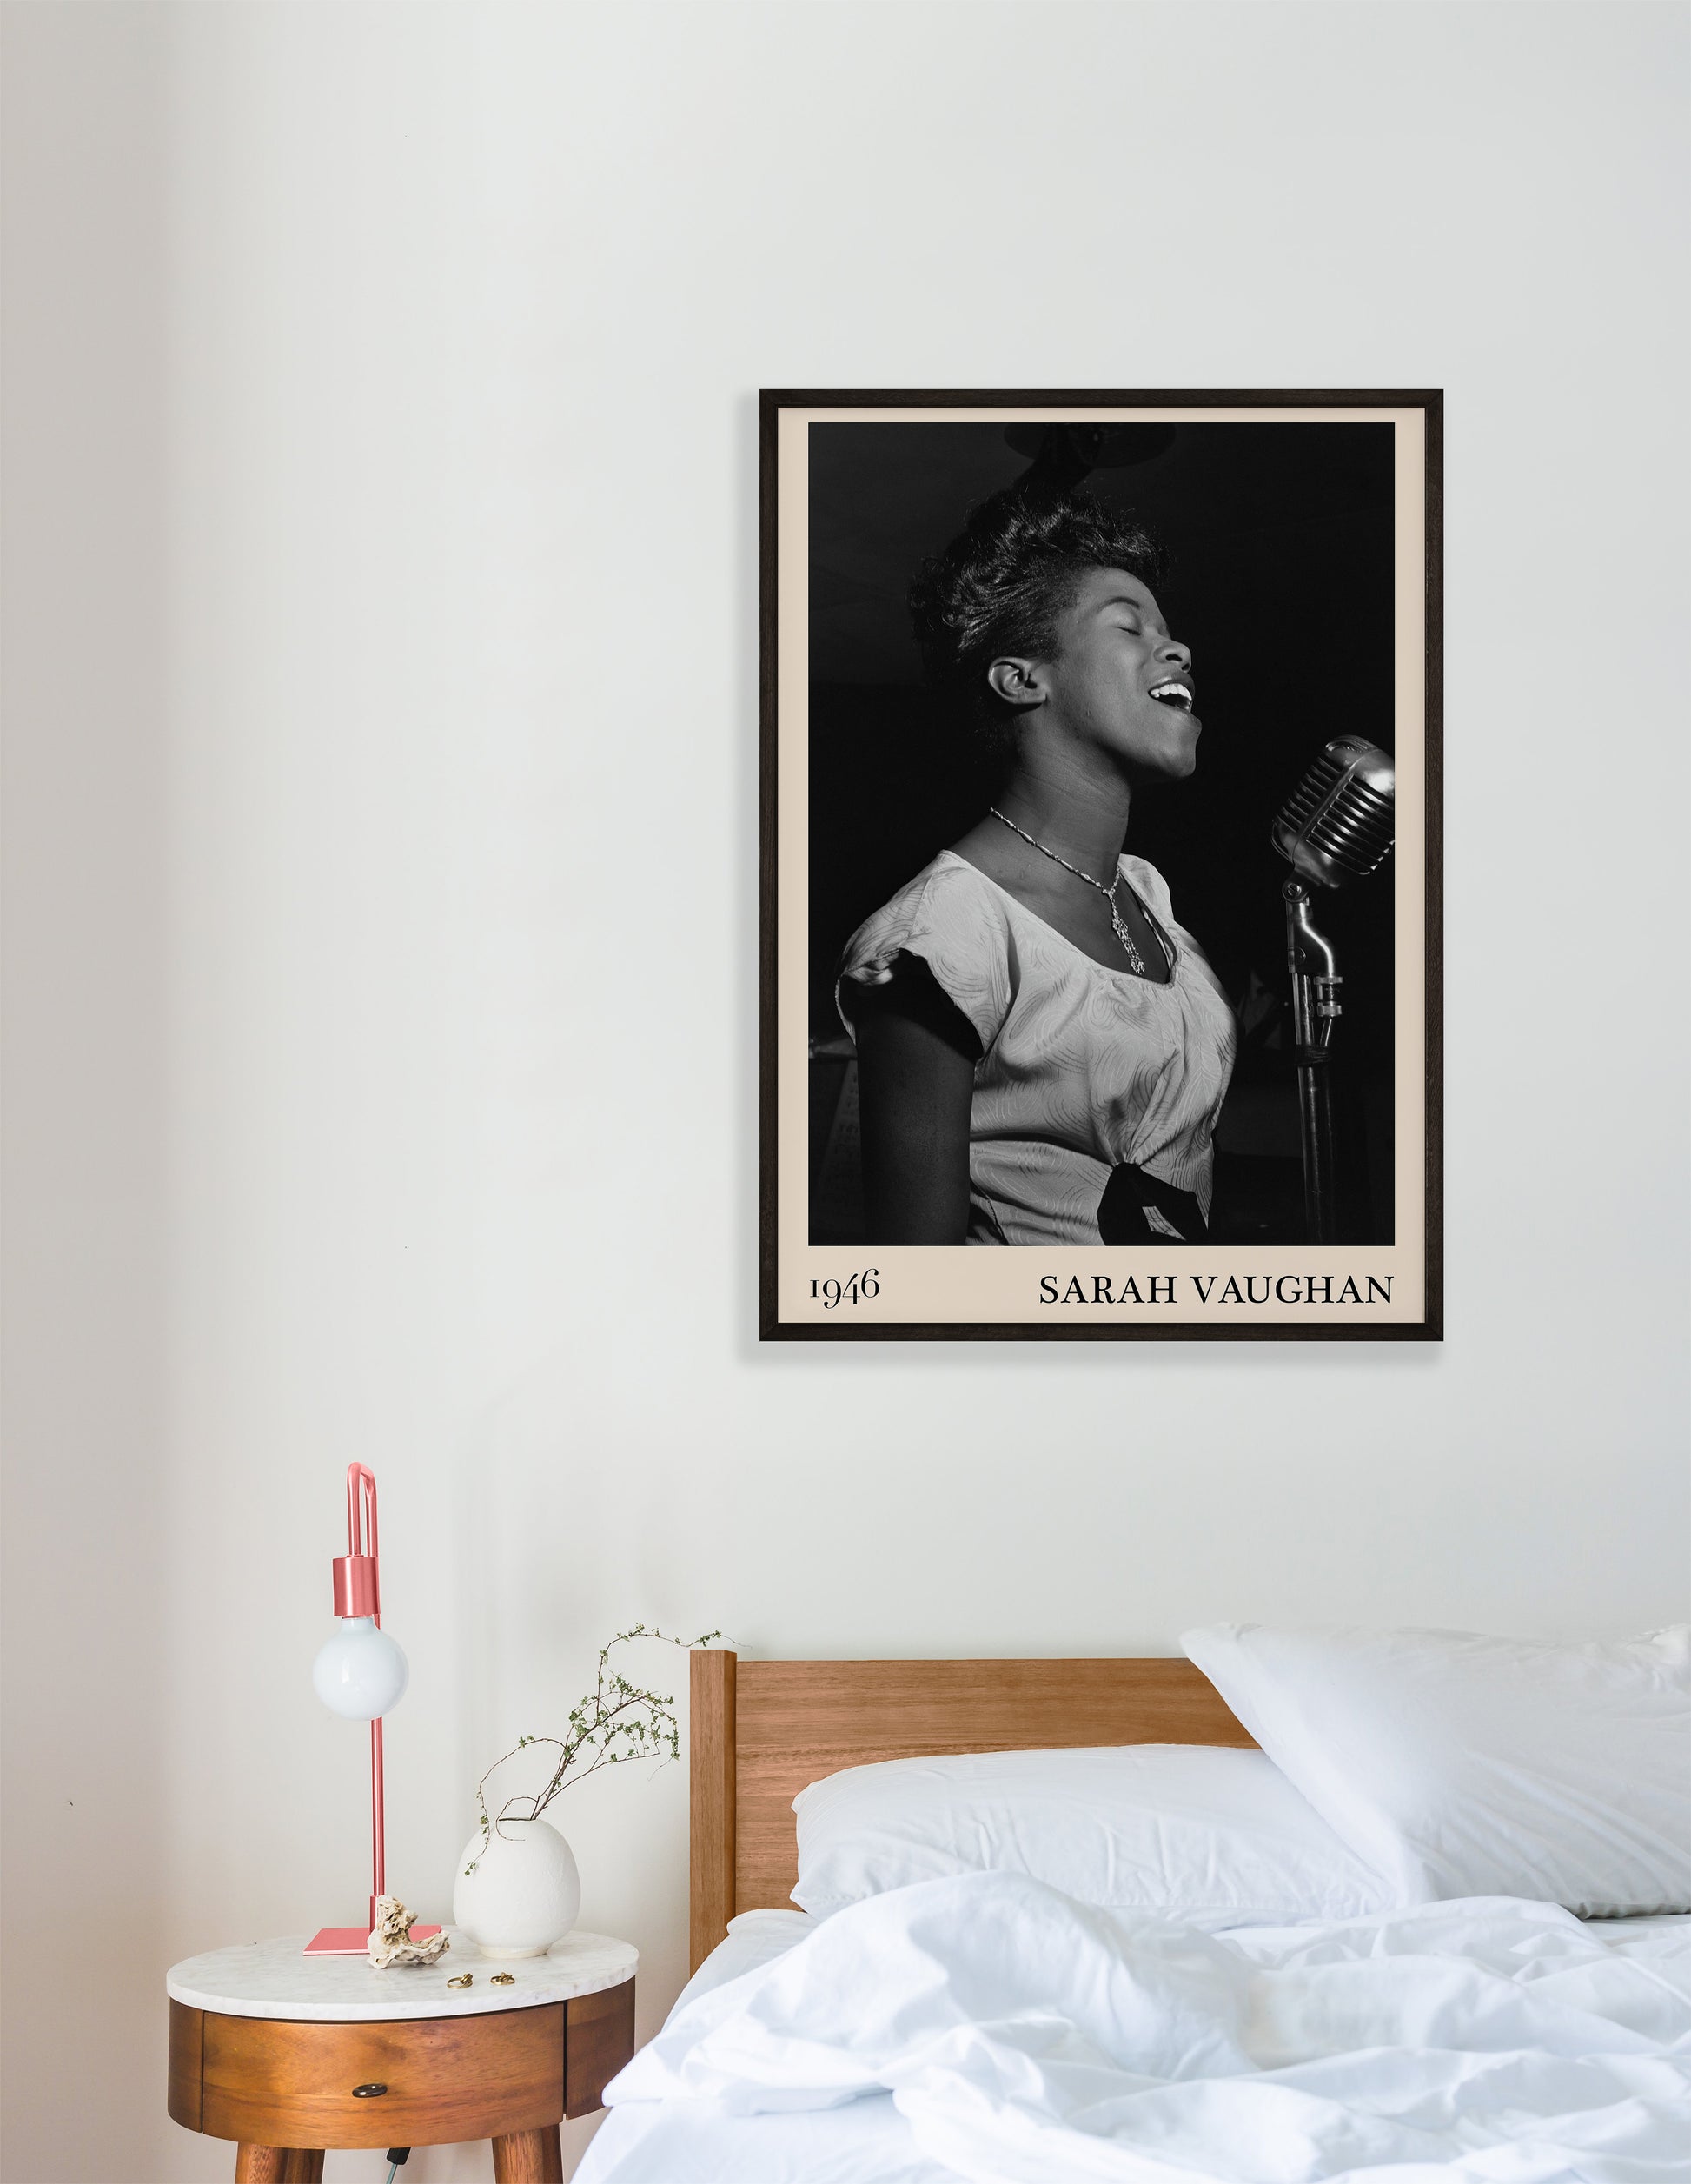 1946 photograph of Sarah Vaughan crafted into a retro black framed jazz print. The poster is hanging on a white bedroom wall.